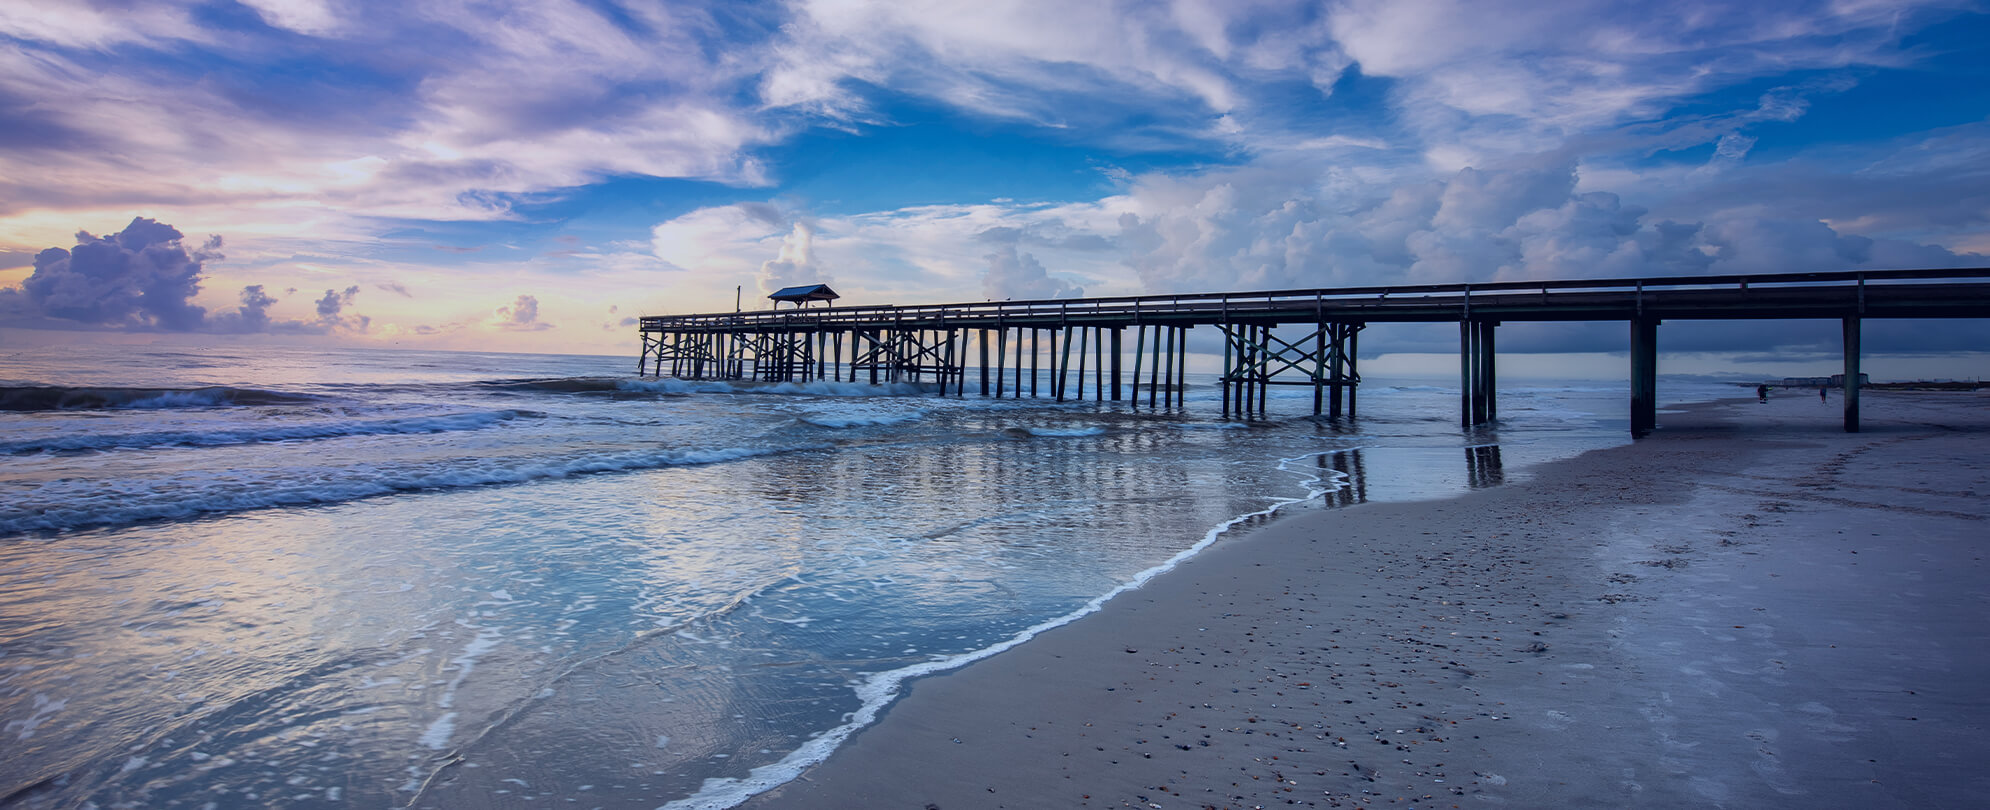 Blue sky and fluffy clouds over beach pier 